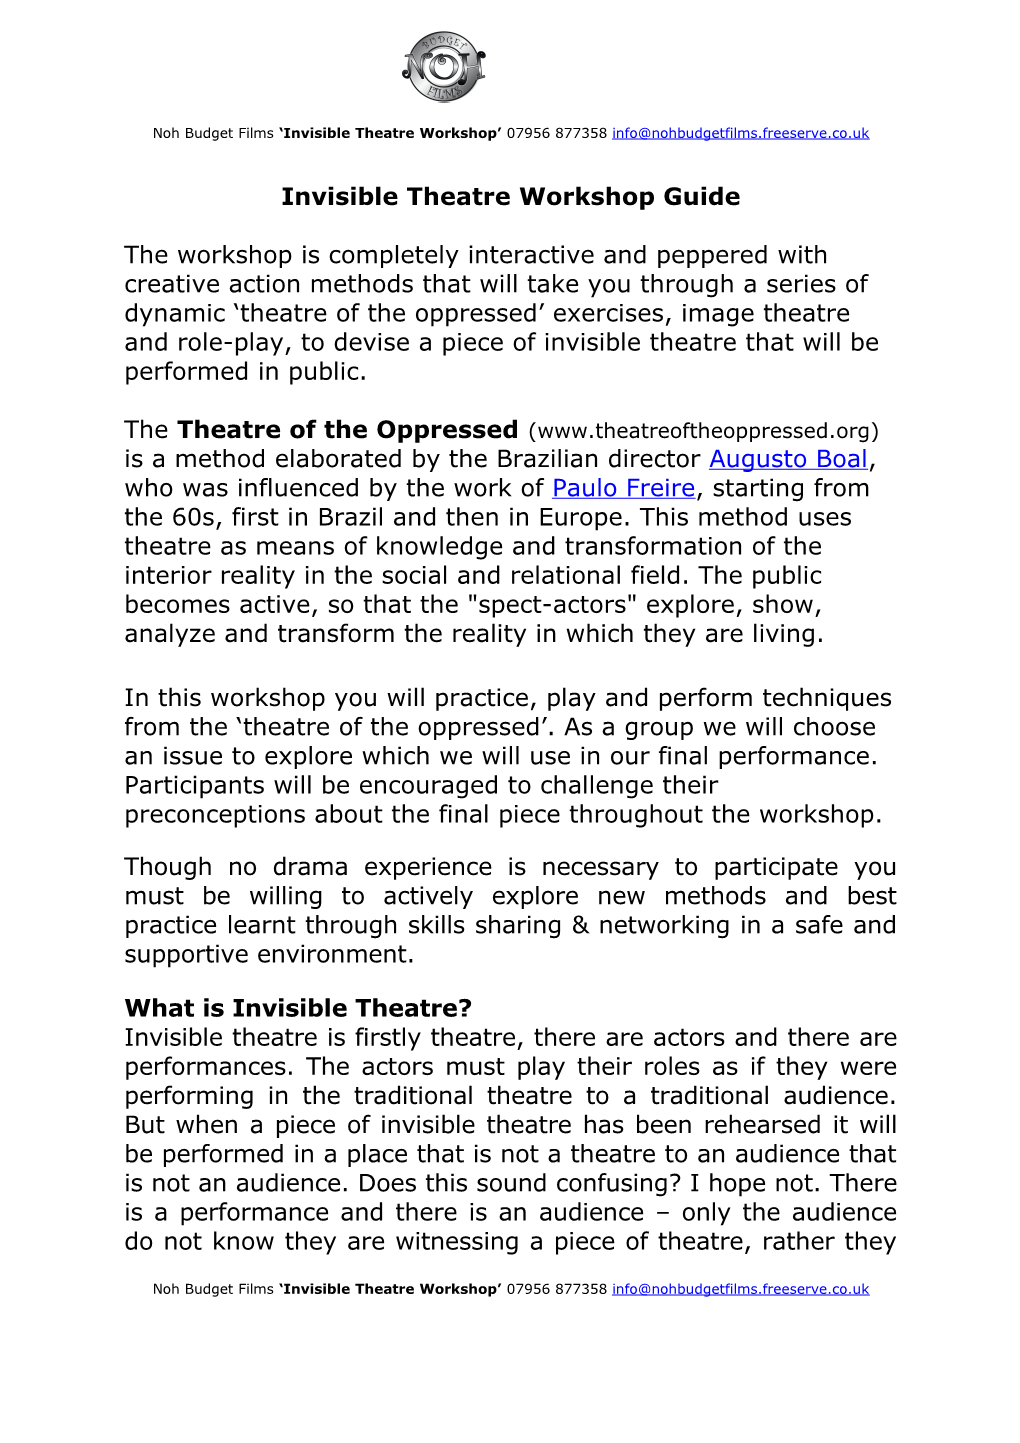 Invisible Theatre Workshop Guide